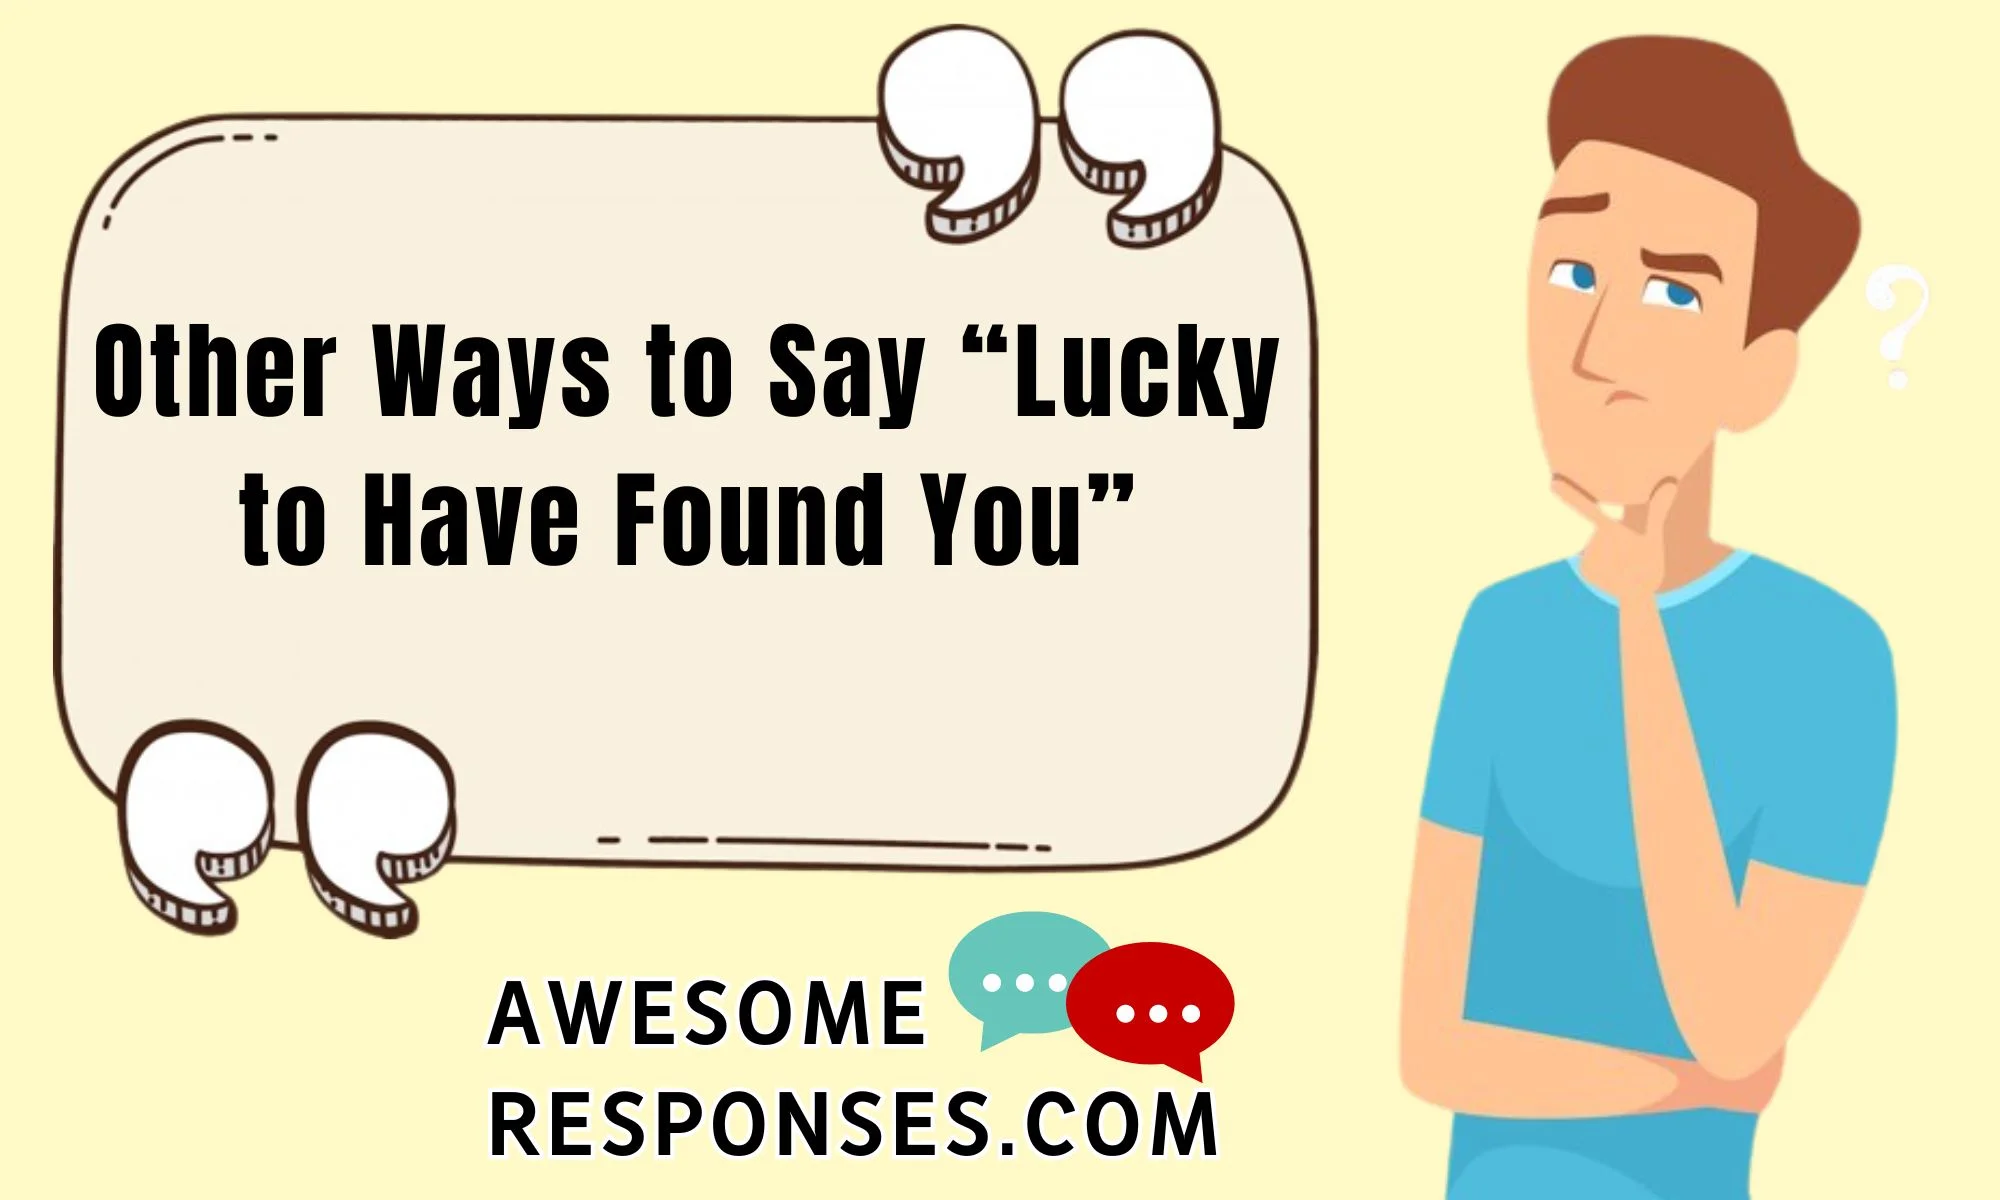 Other Ways to Say “Lucky to Have Found You”